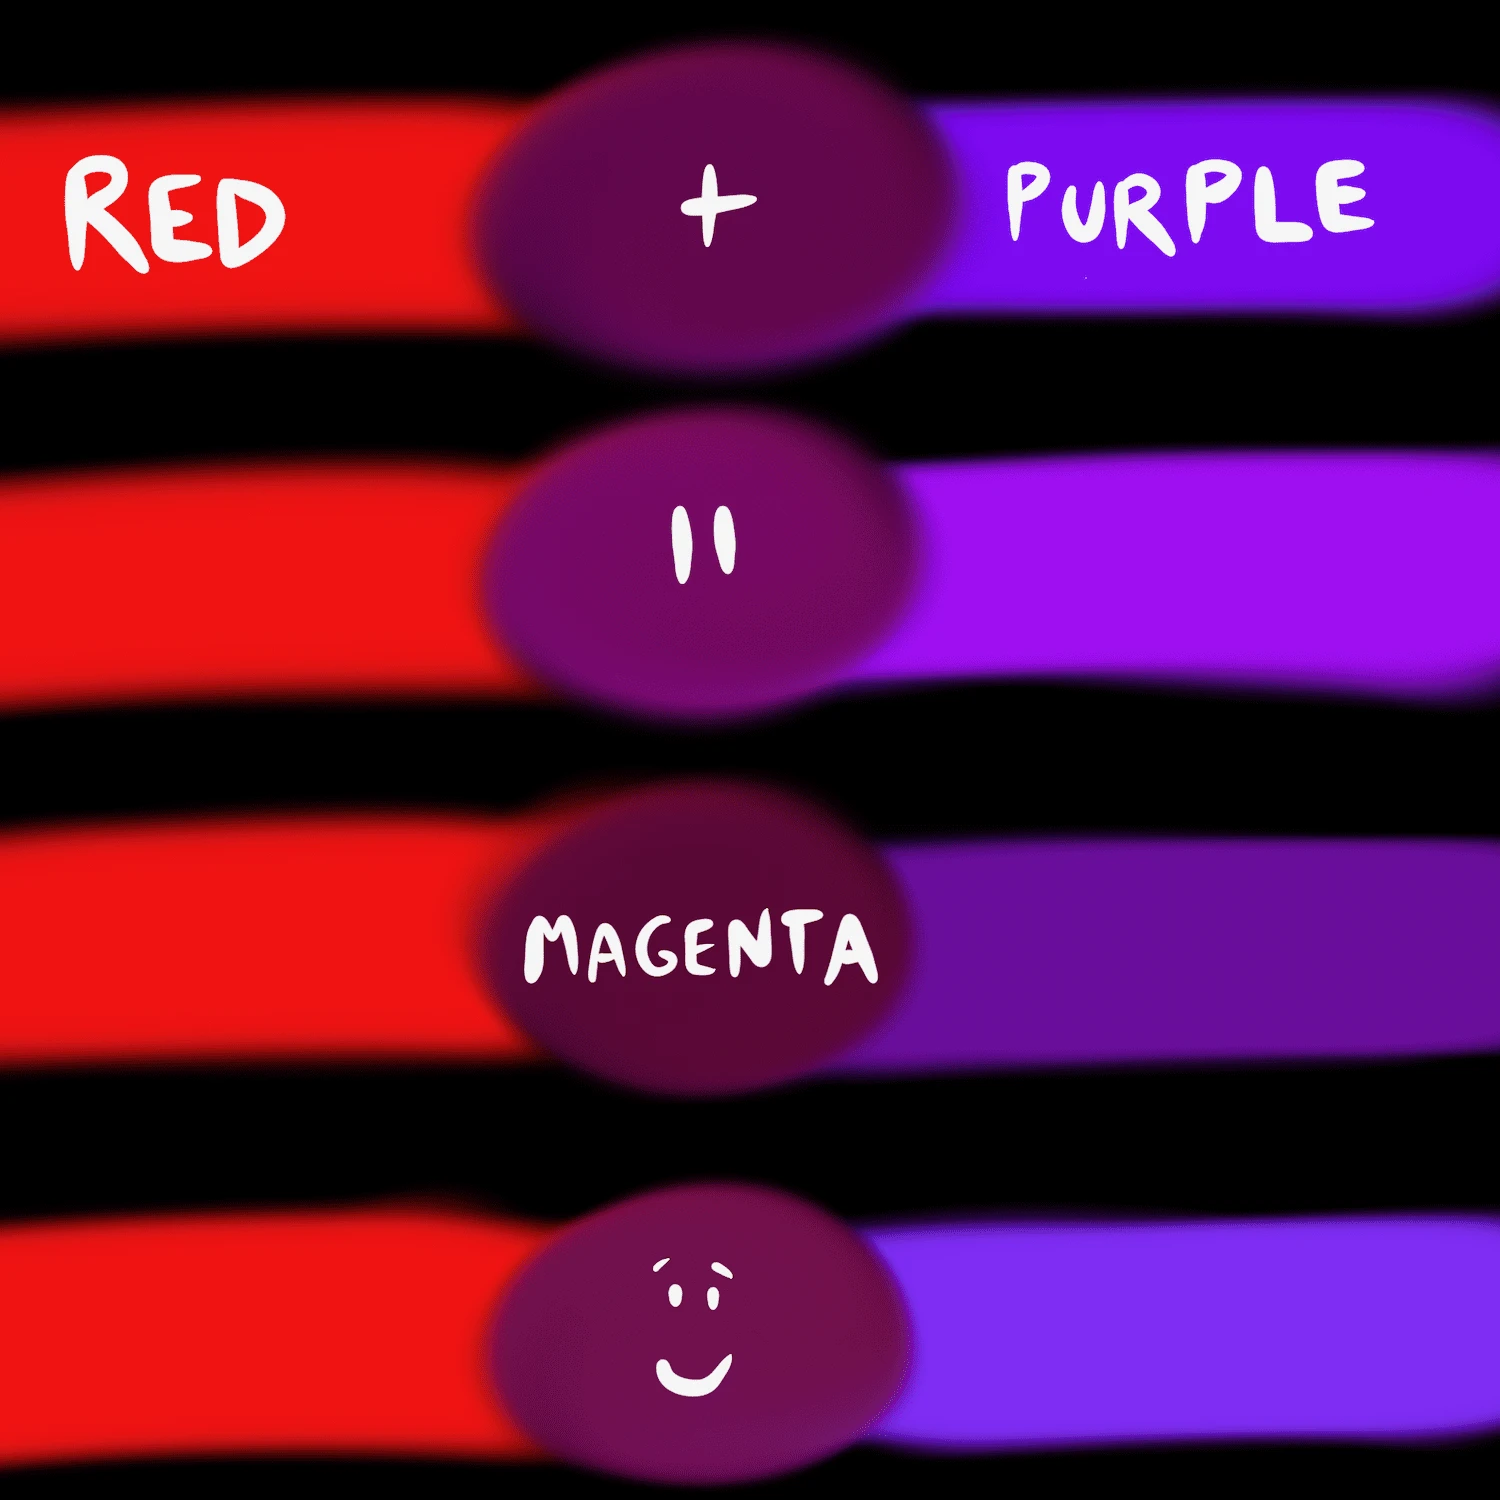 What do purple and red make when mixed?